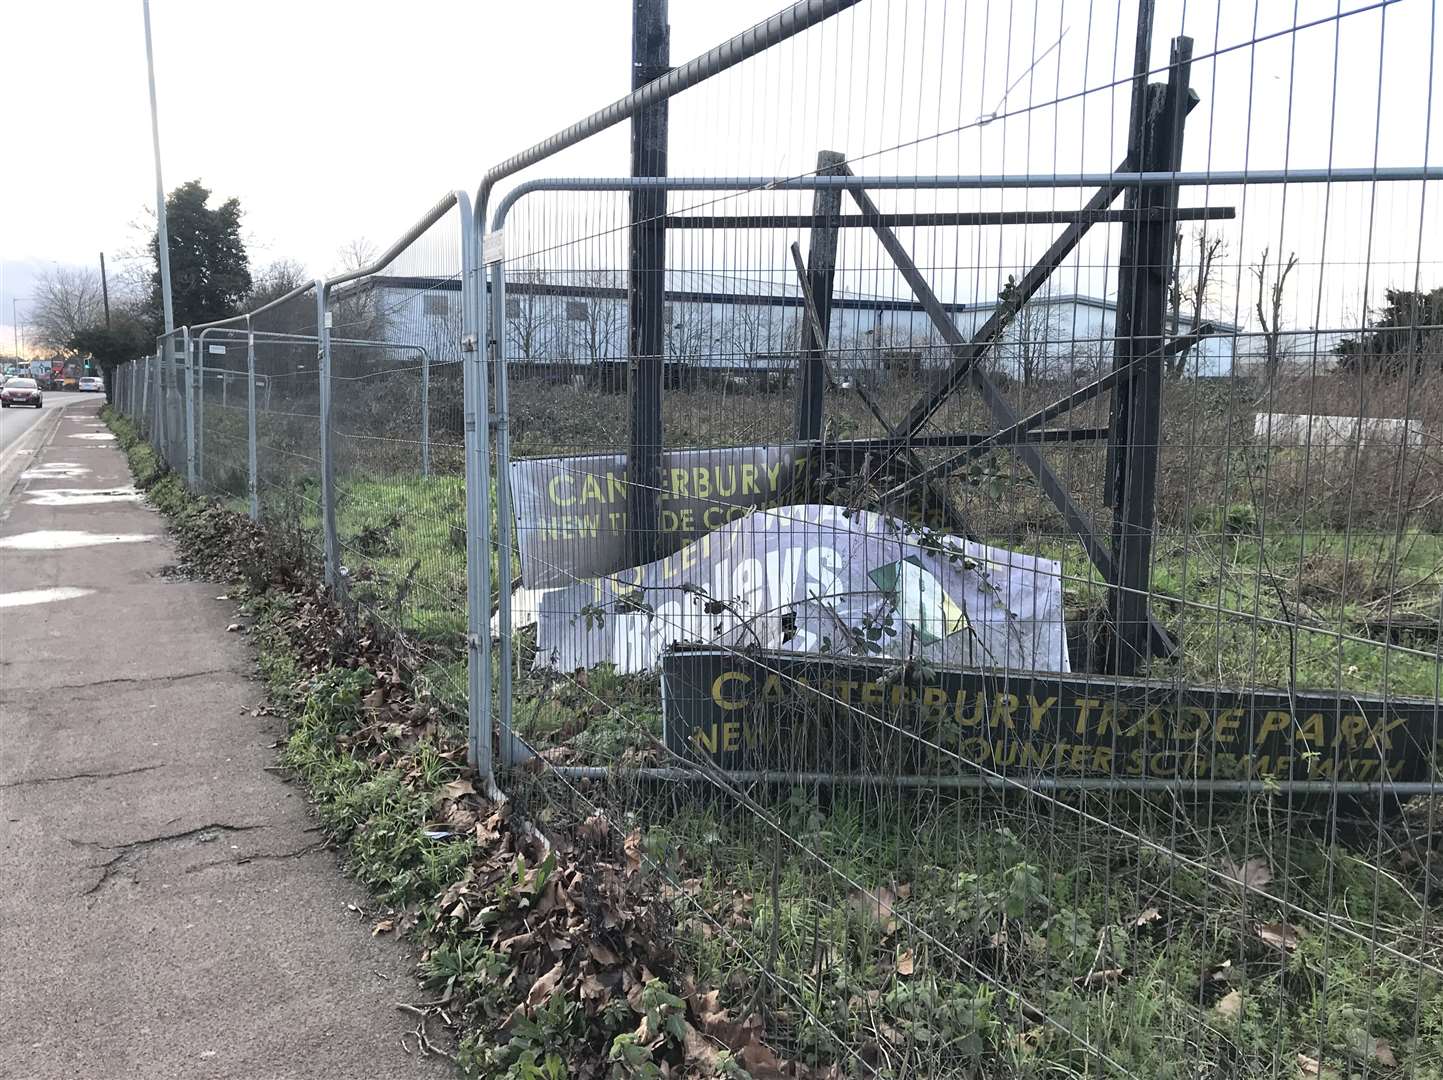 The Sturry Road site, which used to be part of the Southern Water sewage works, has long been a blot on Canterbury's landscape